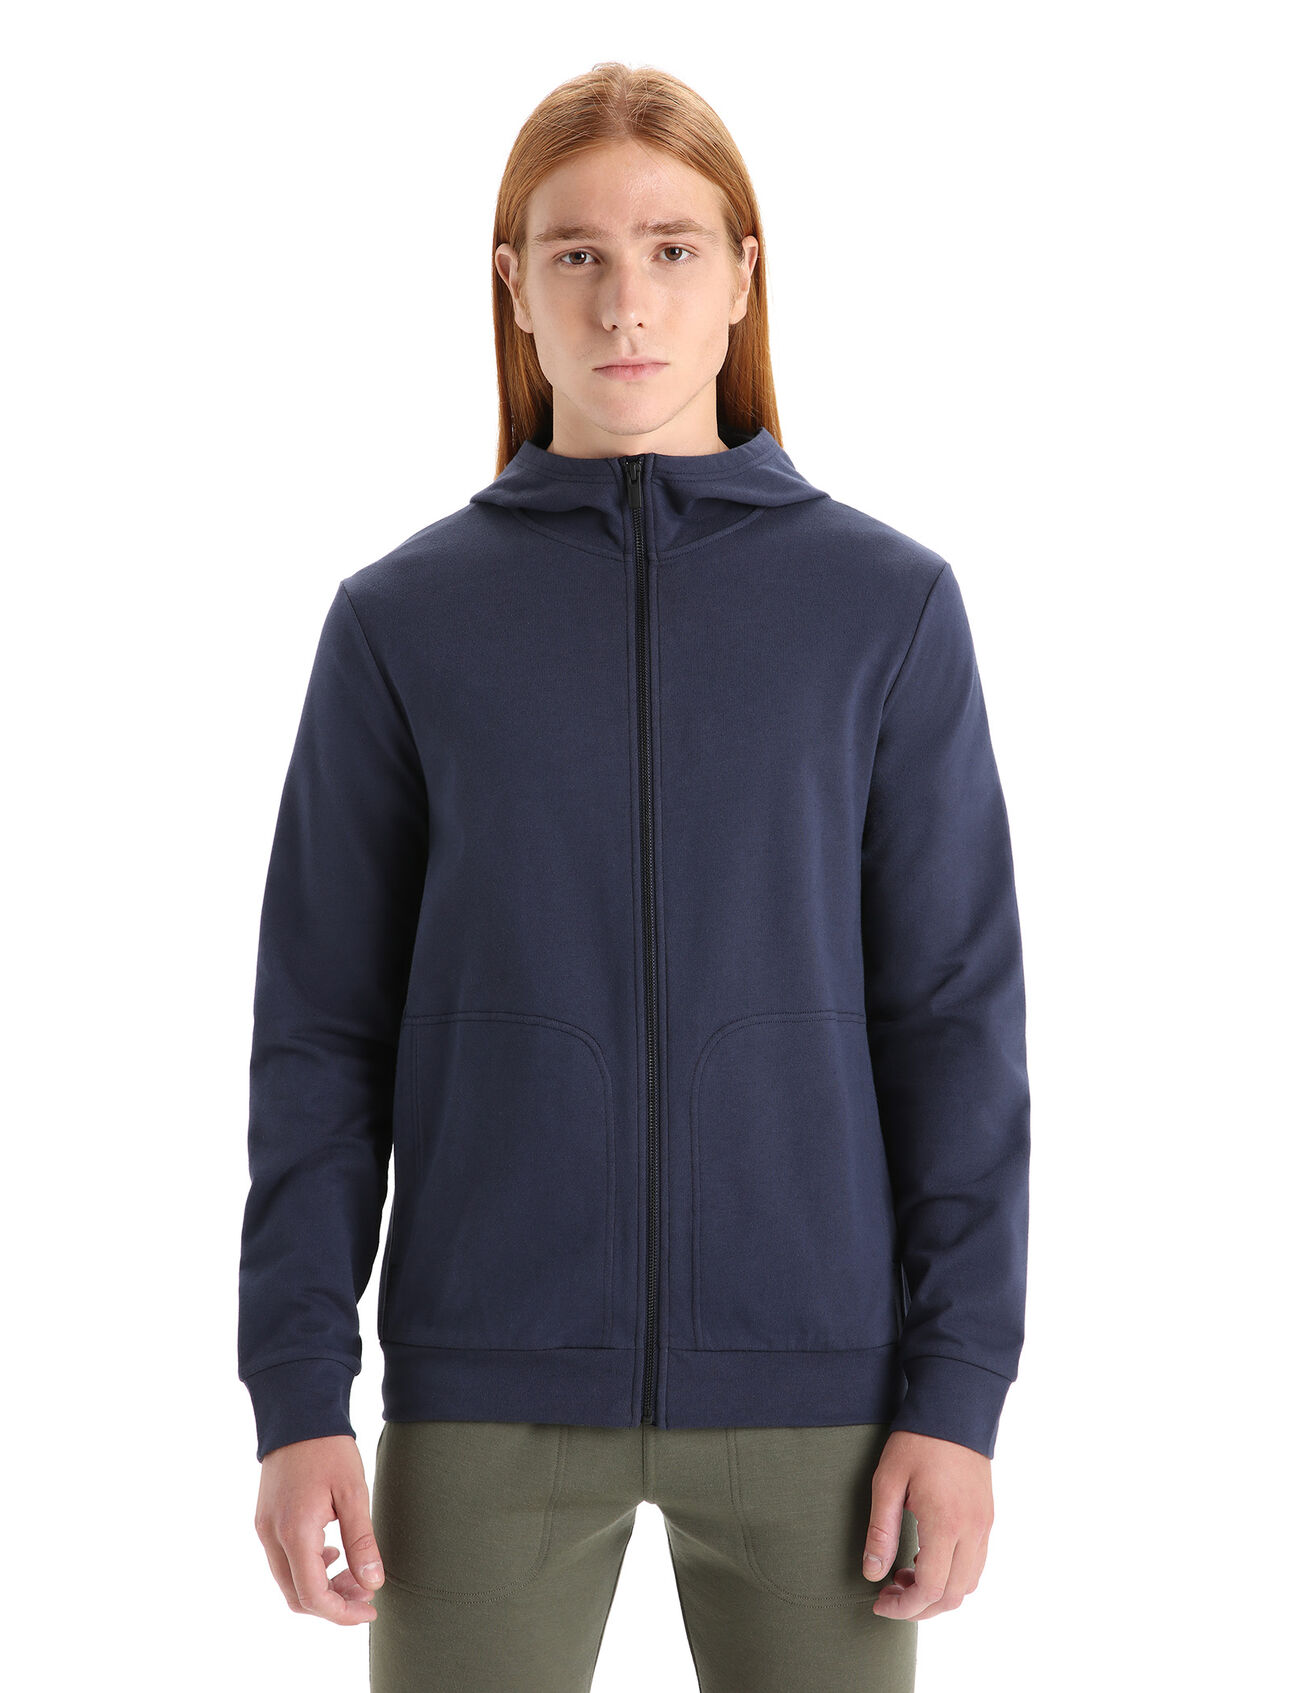 Mens Merino Central Classic Long Sleeve Zip Hoodie A clean, classic and comfortable everyday hooded sweatshirt that blends natural merino wool with organically grown cotton, the Central Classic Long Sleeve Zip Hoodie is durable, breathable and incredibly versatile.  